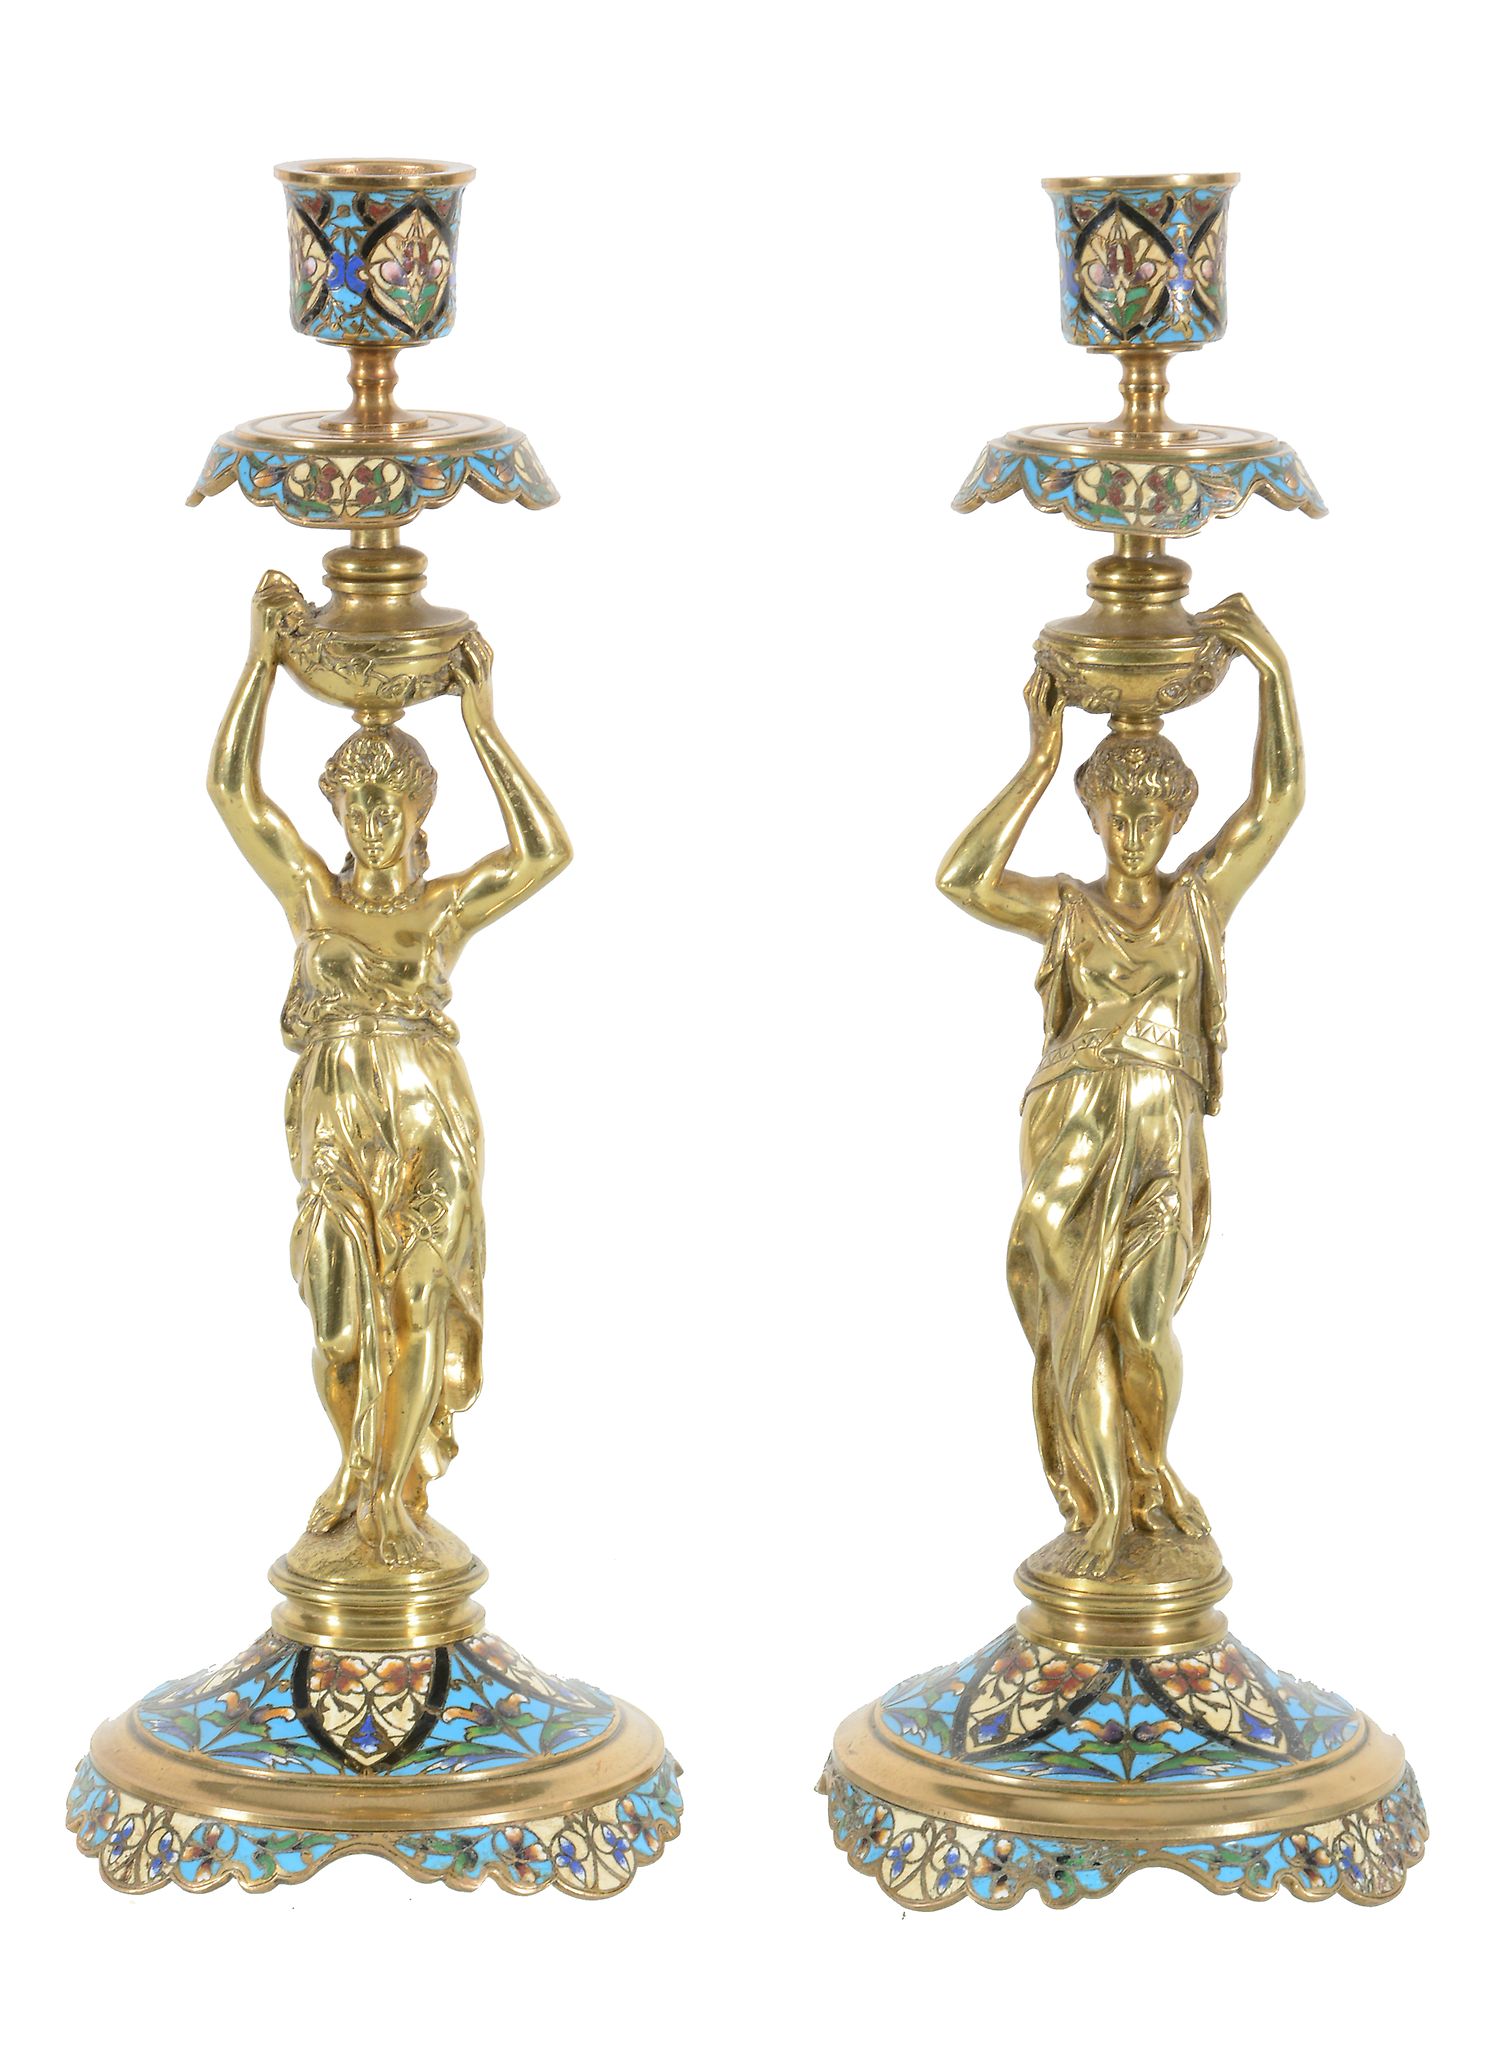 A pair of French gilt bronze and champleve enamel figural candlesticks, circa 1880, probably